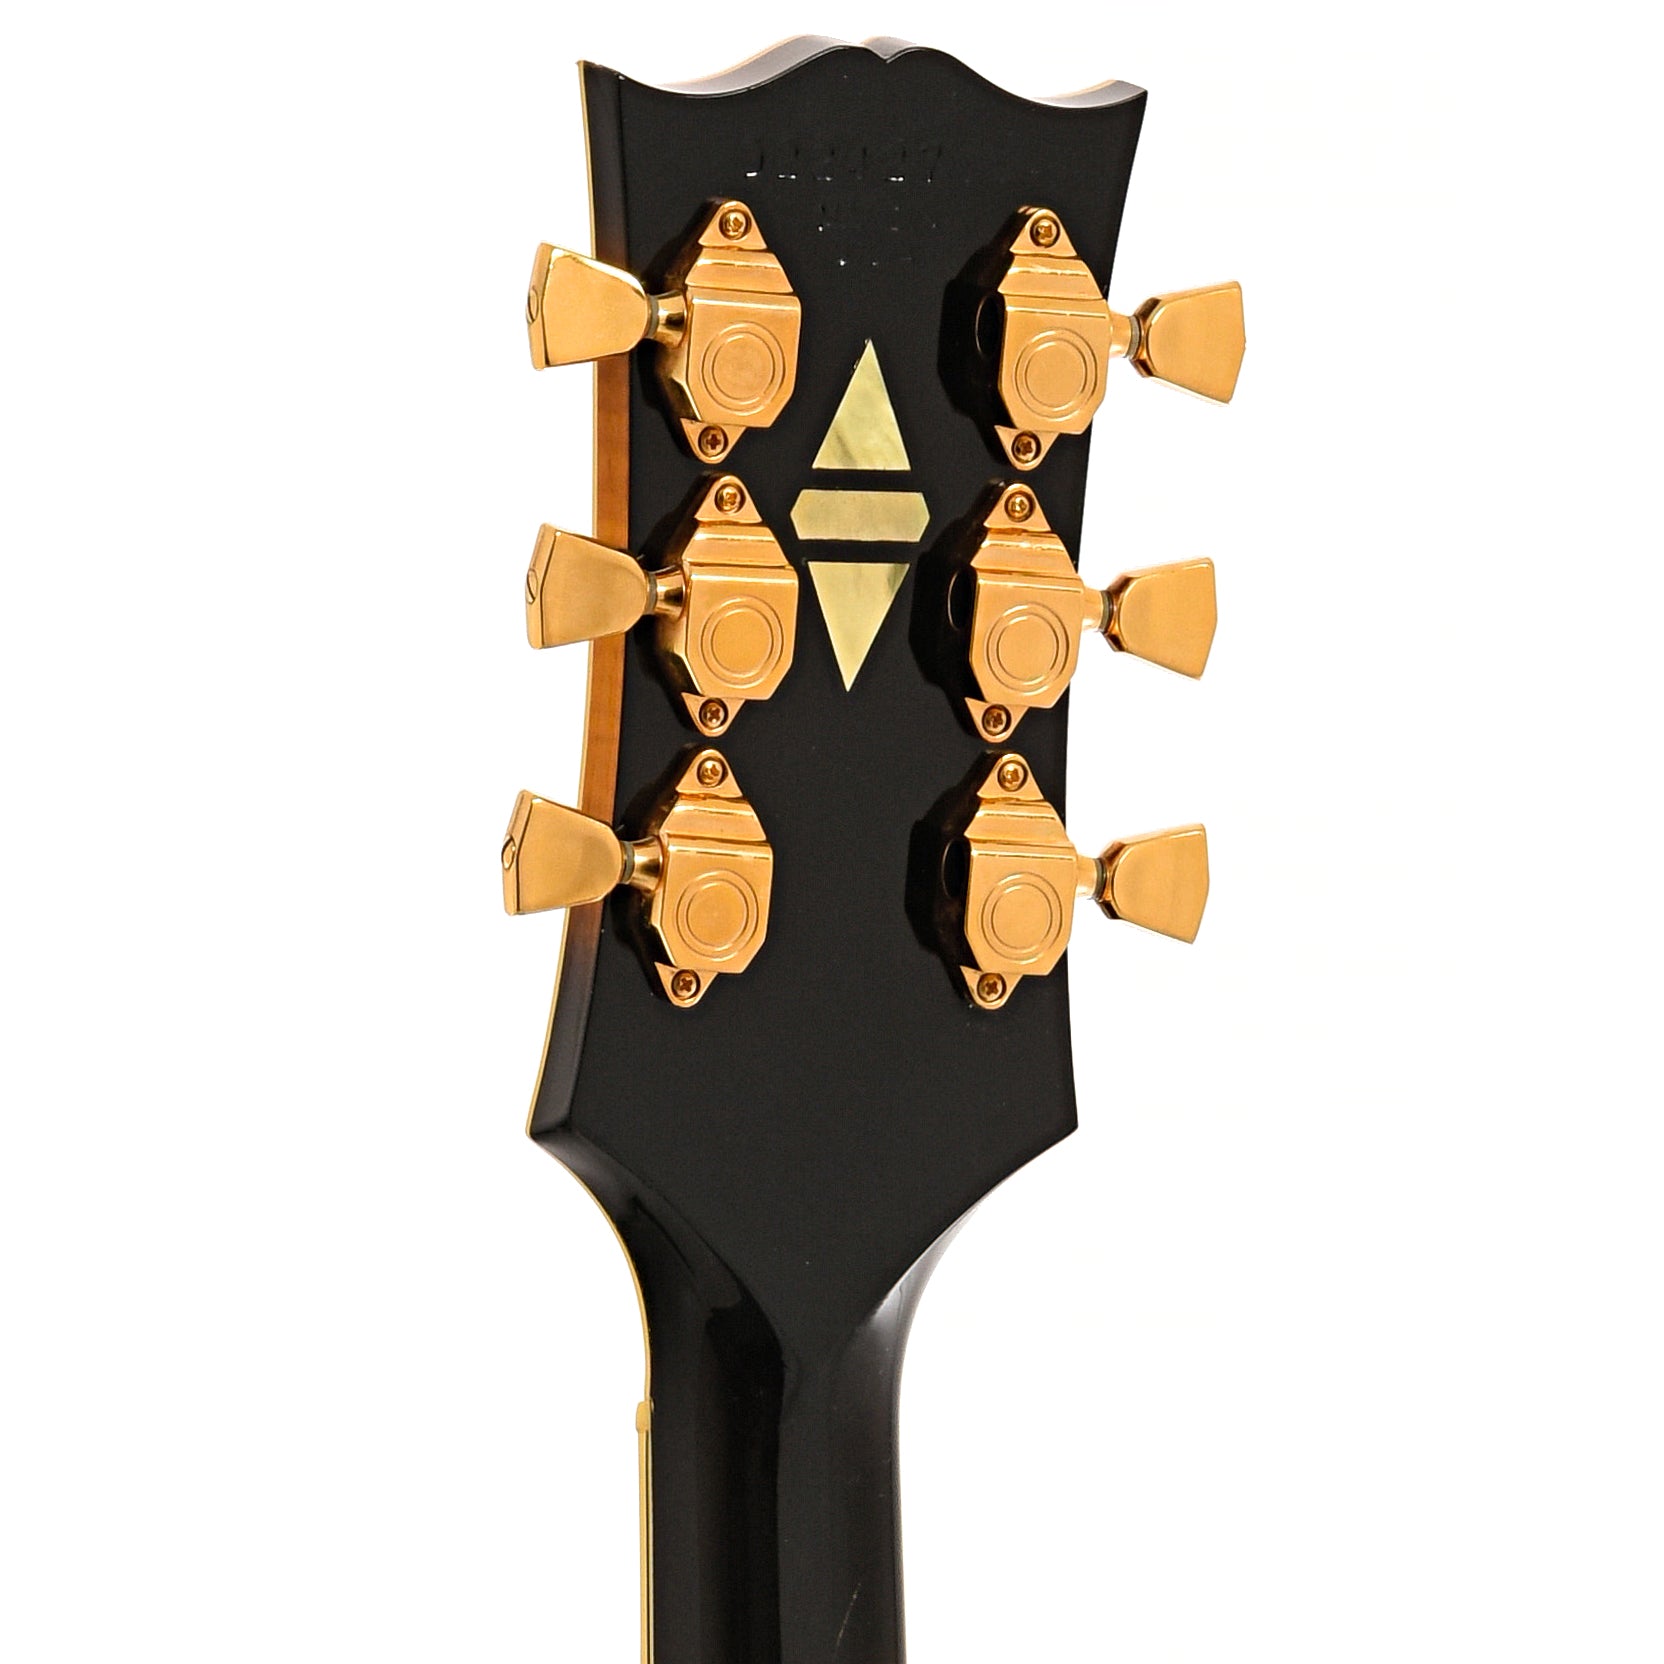 Back headstock of Gibson Super 400 CES Hollow Body